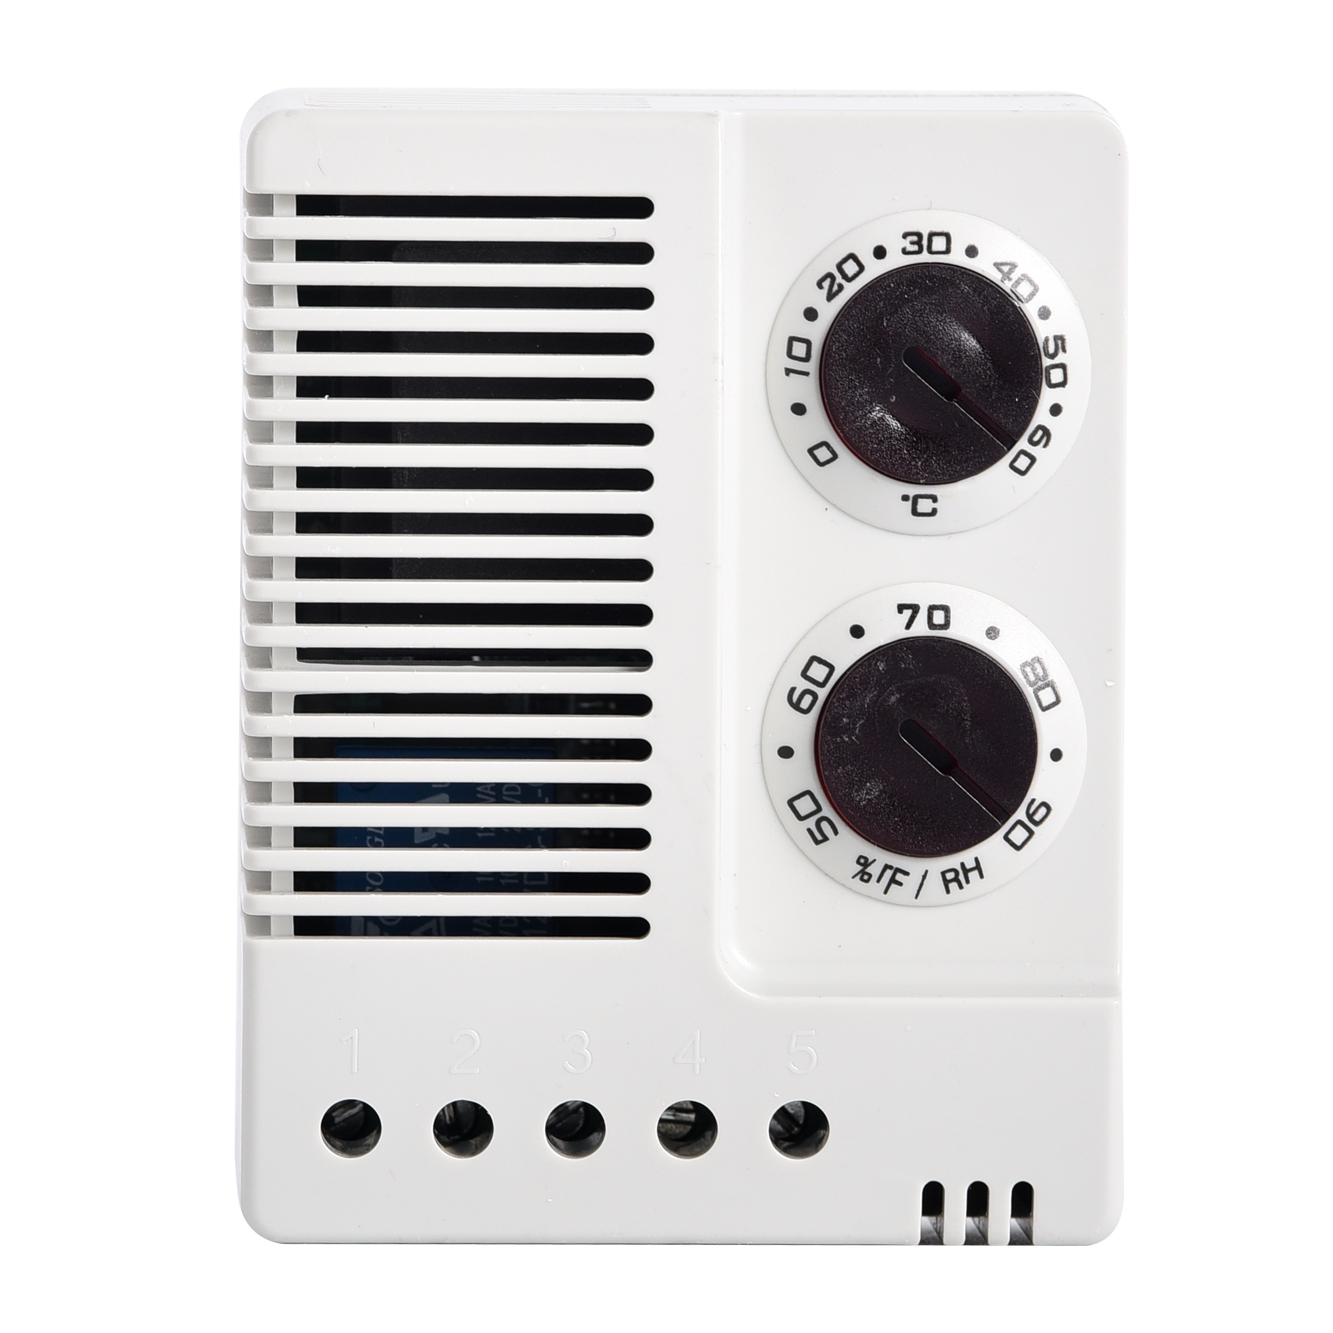 Cabinet electronic temperature and humidity controller